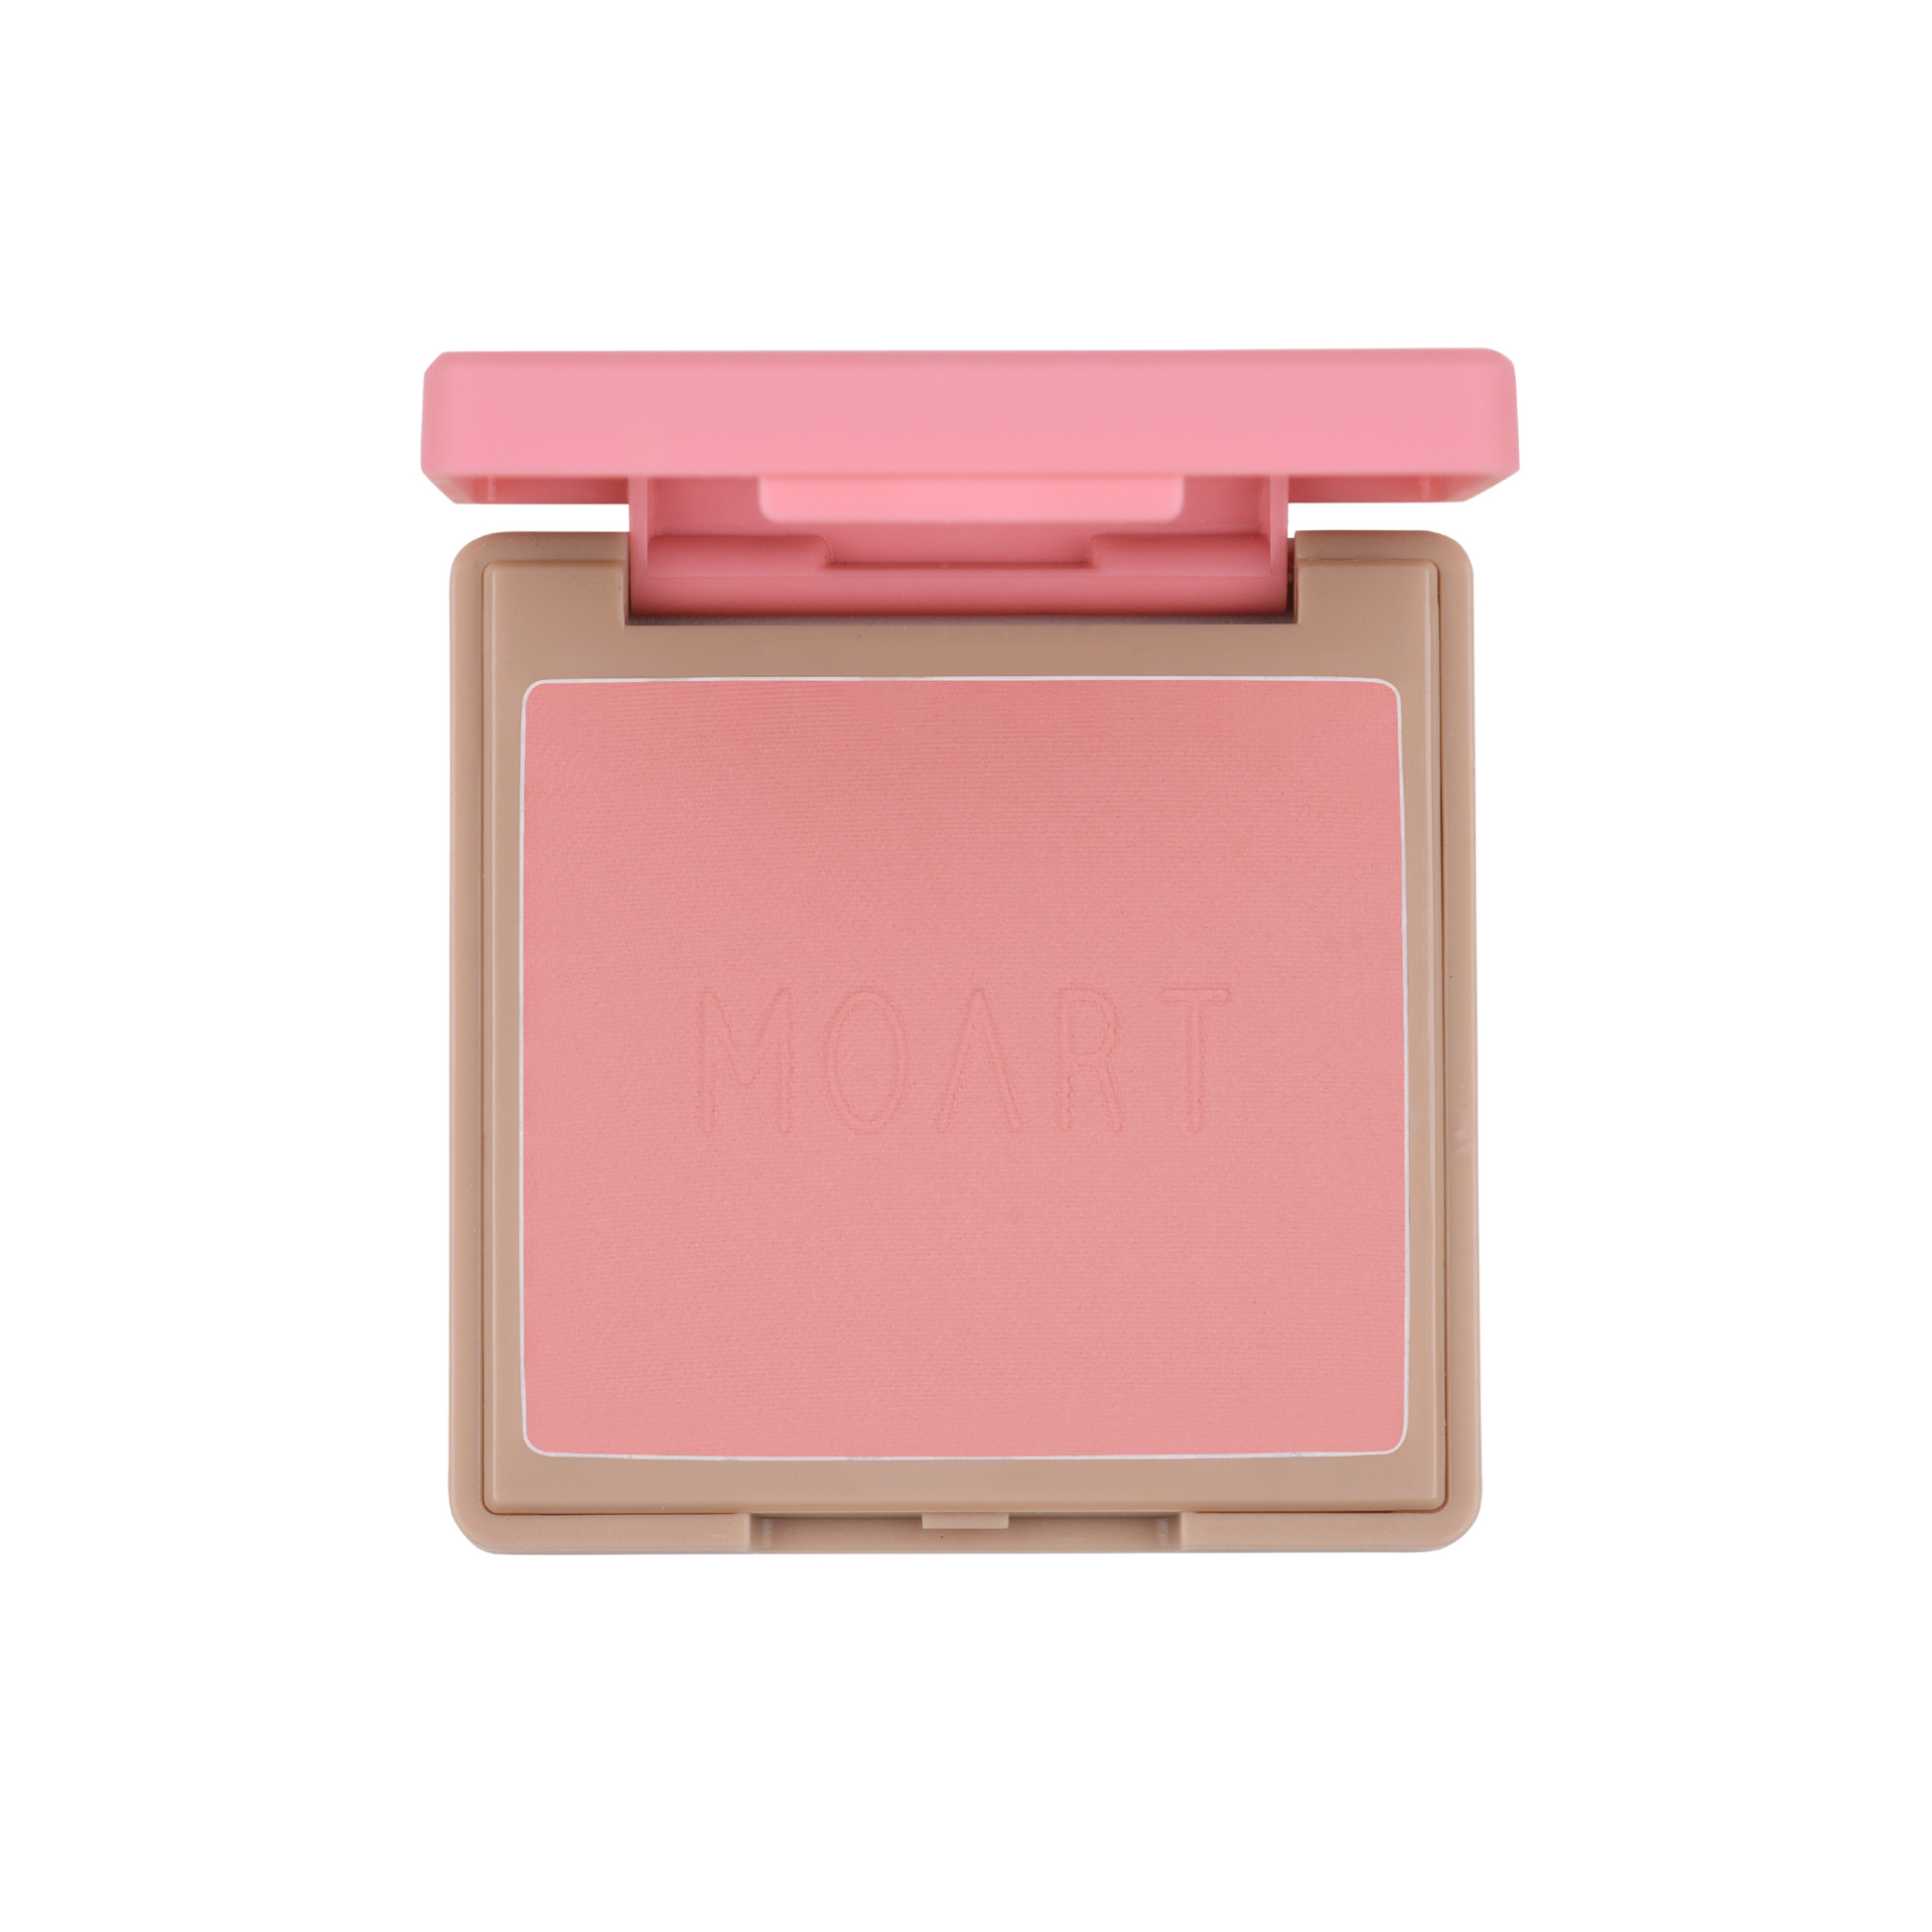 Moart Velvet Blusher contains hyaluronic acid, province rose extract, rosemary leaf extract, aloe vera leaf extract, and lily extract - formula that prevents water from evaporation and keeps the easily-dried cheeks moist.